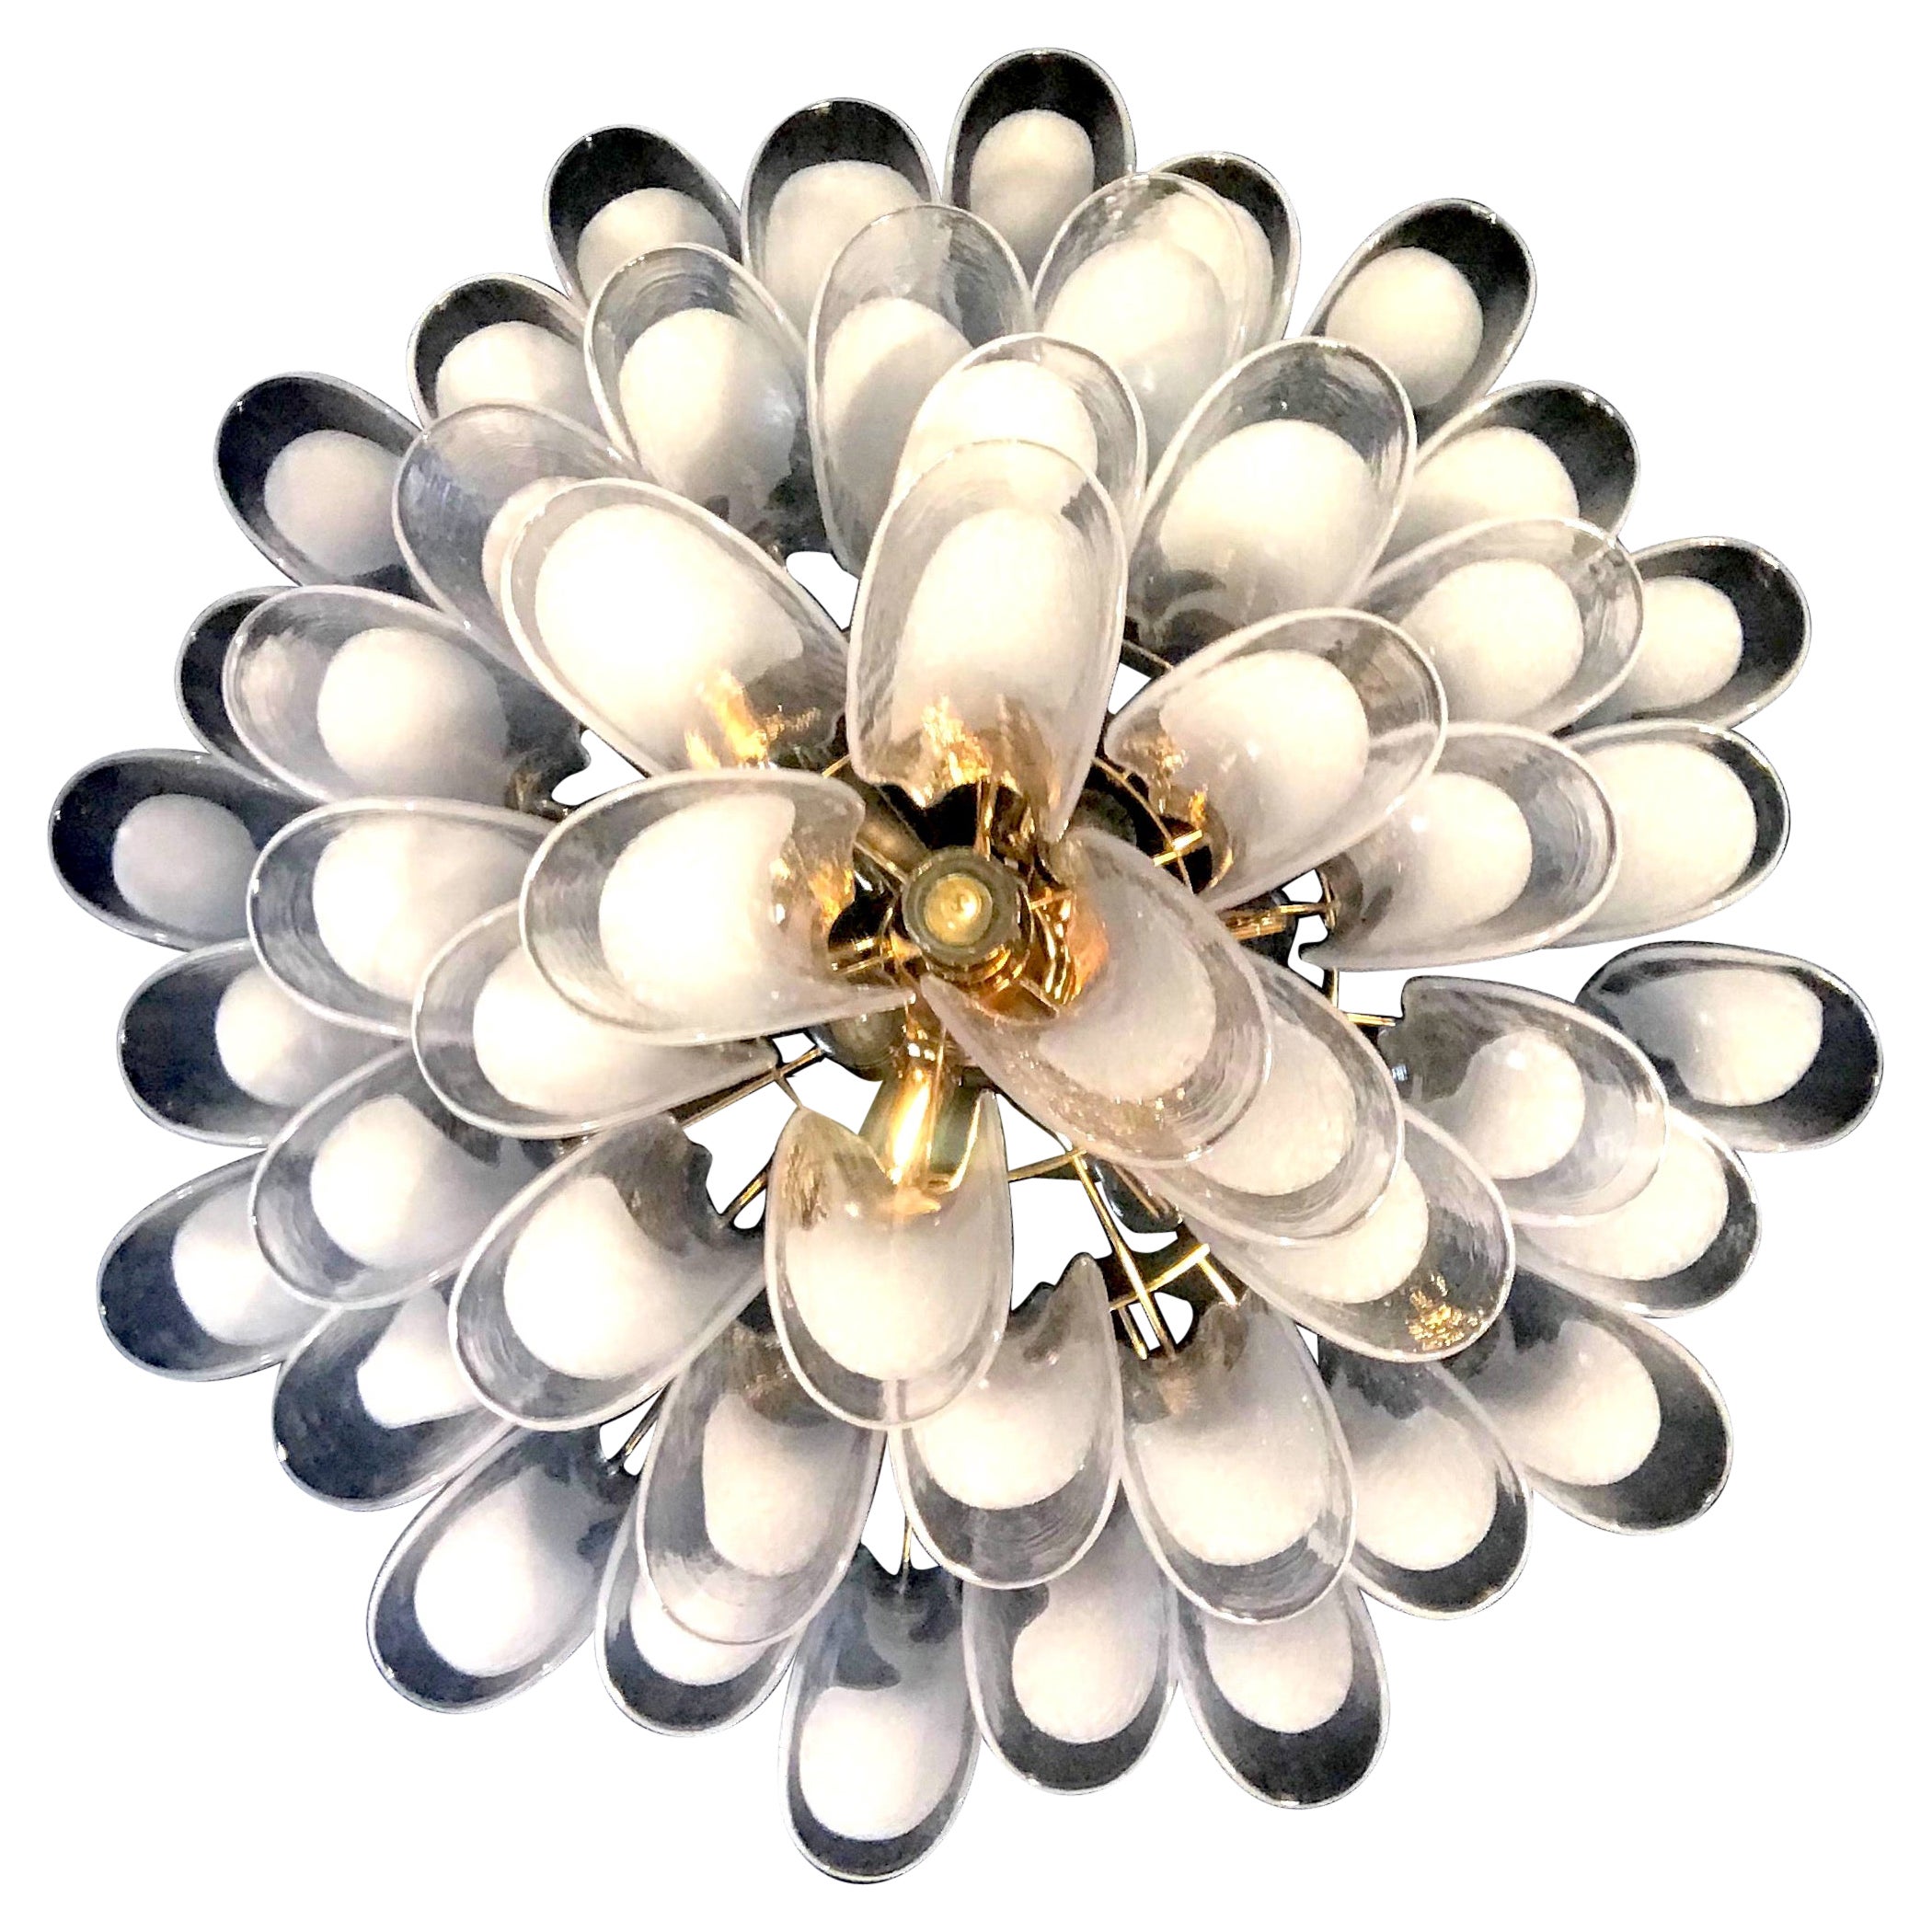 Huge White Tulip Petals Murano Chandelier or Ceiling Light For Sale